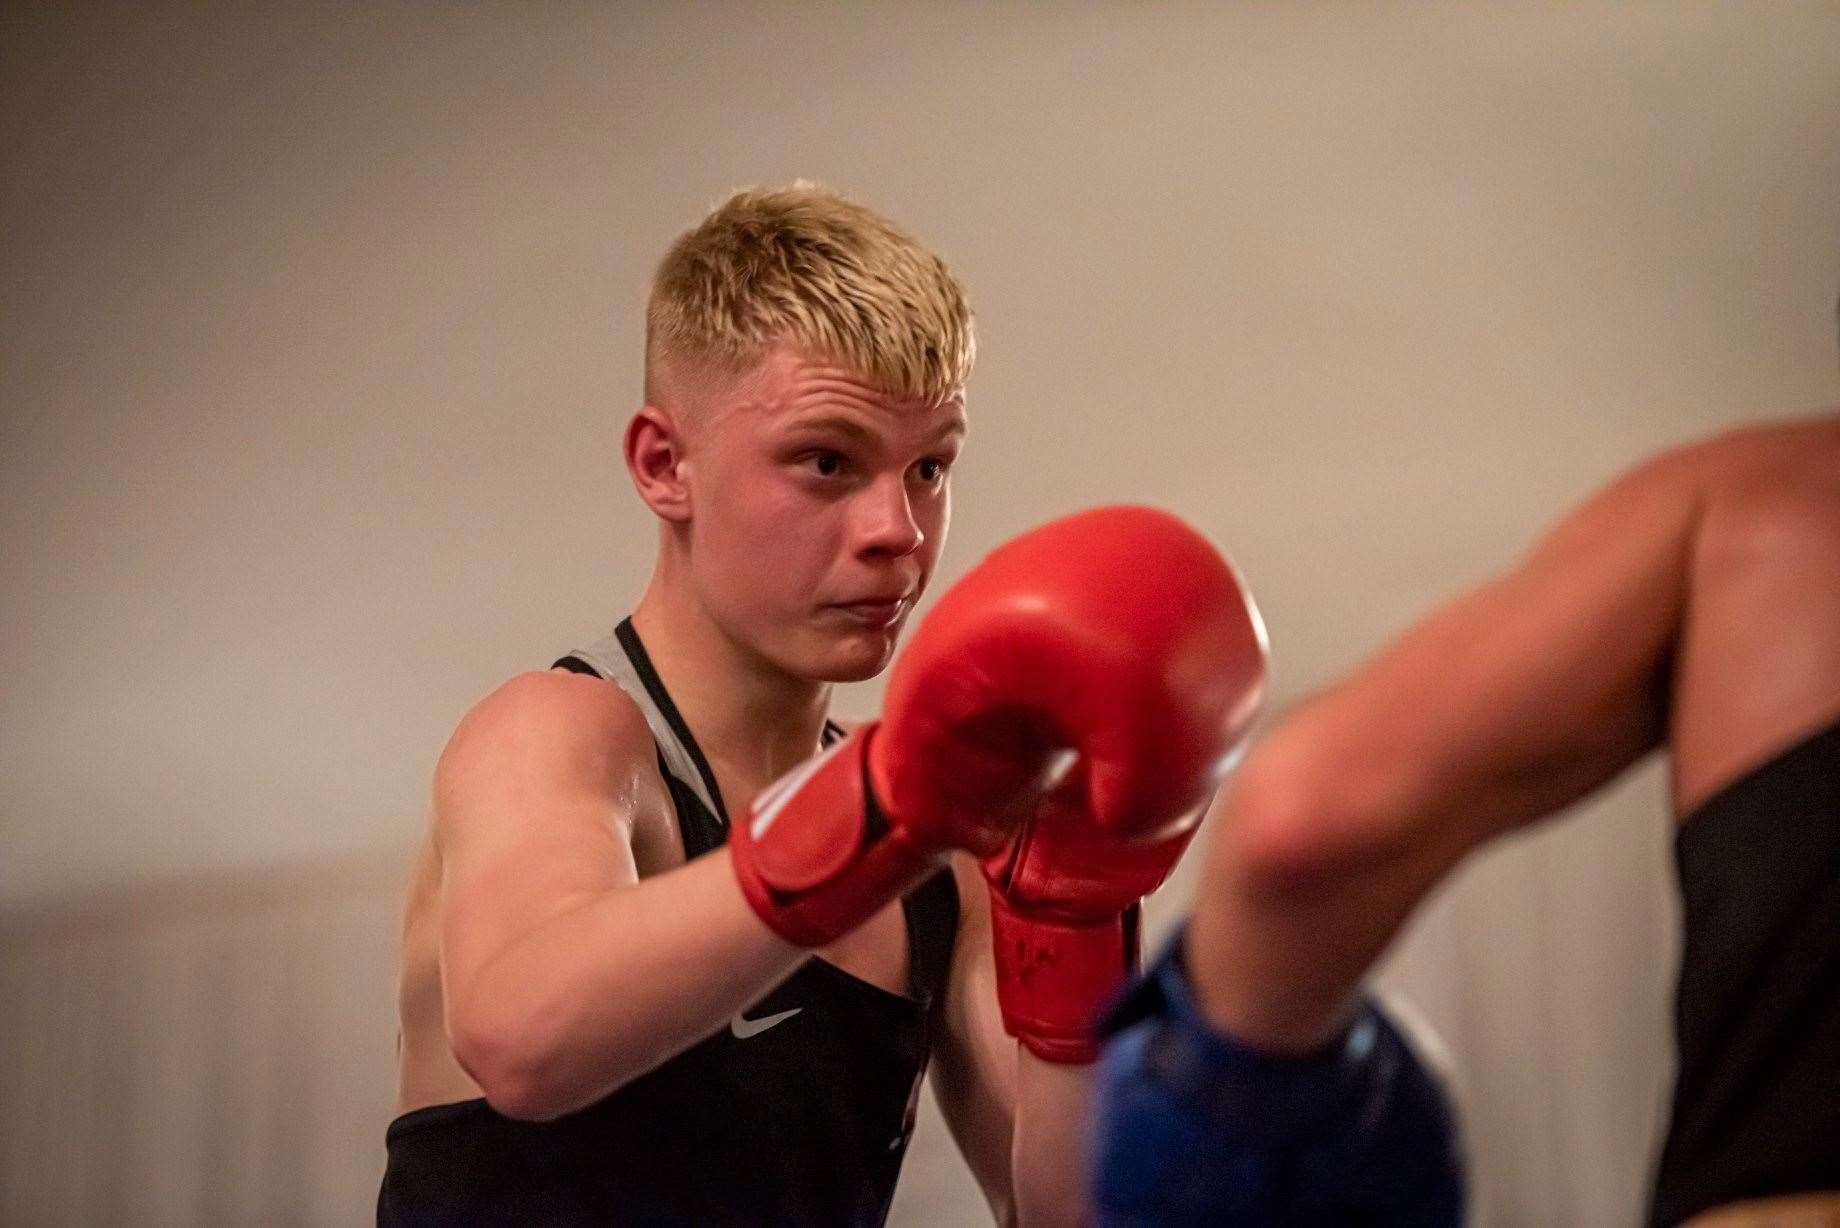 Fraser Wilkinson’s dedication on the Scottish amateur boxing scene has earned him a professional deal. Picture: Daniel Forsyth